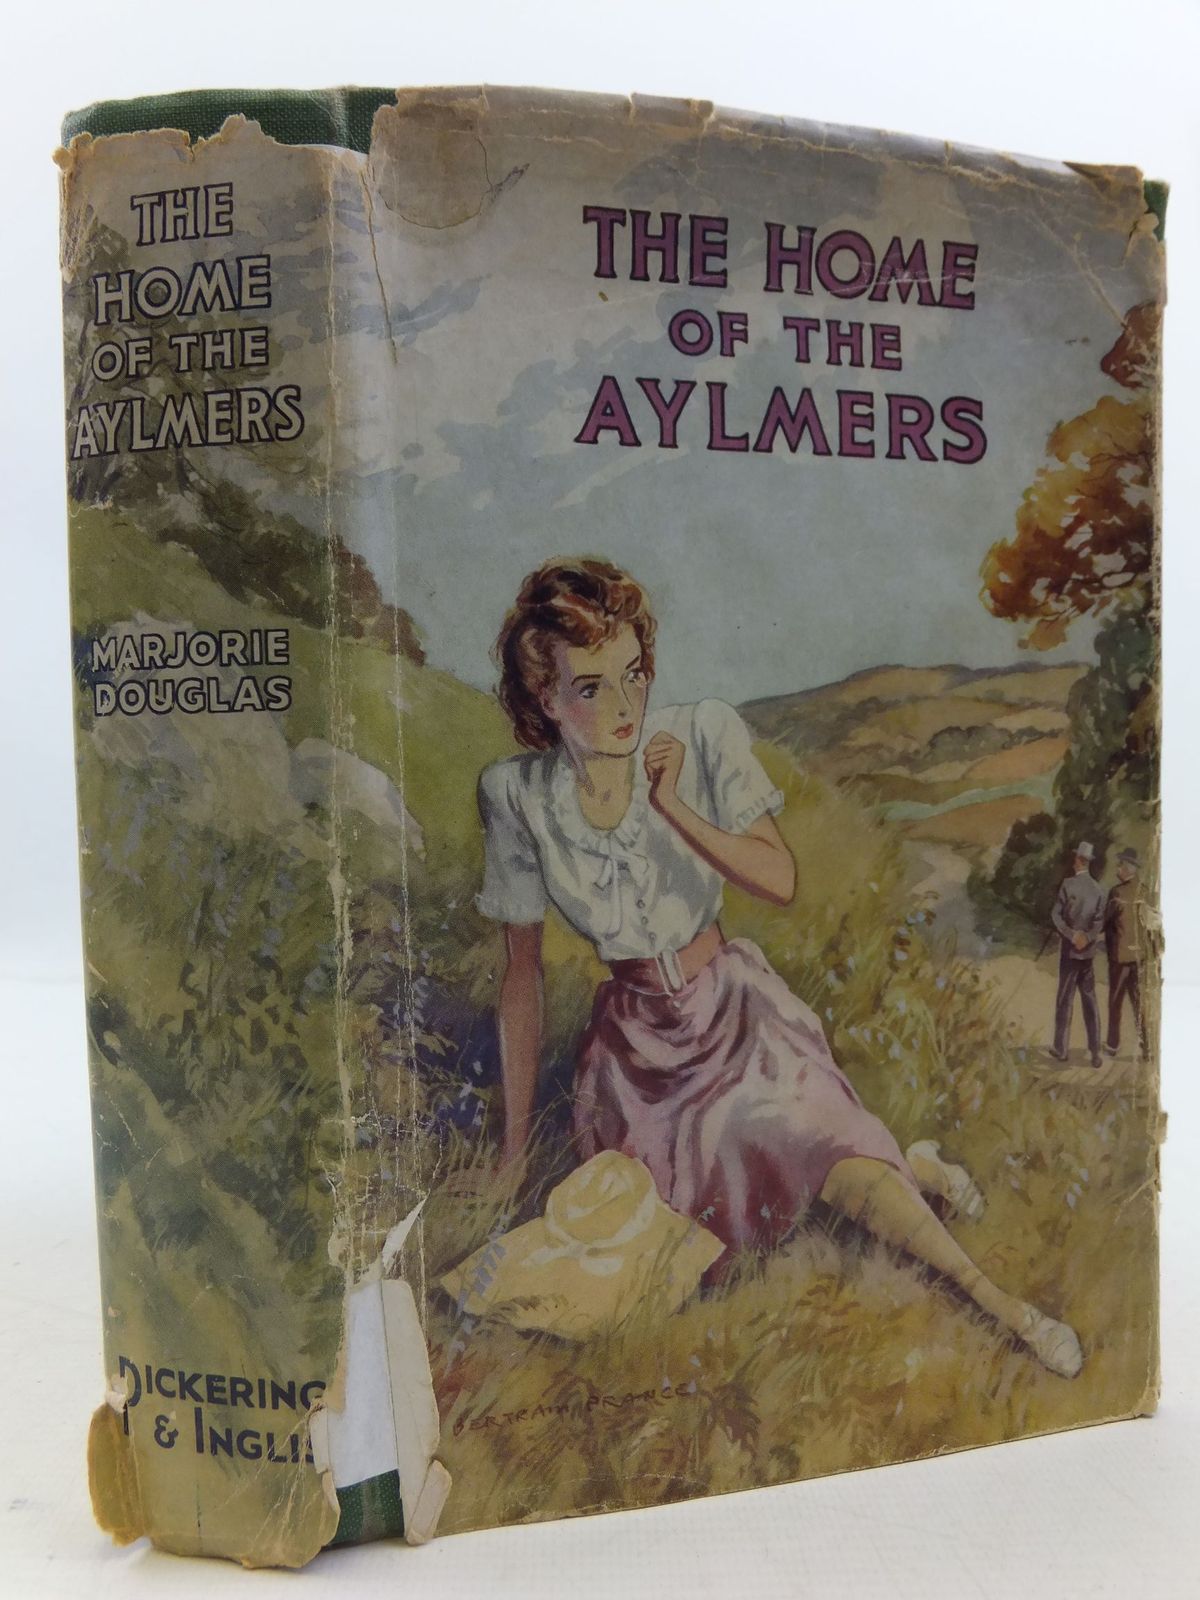 Cover of THE HOME OF THE AYLMERS by Marjorie Douglas